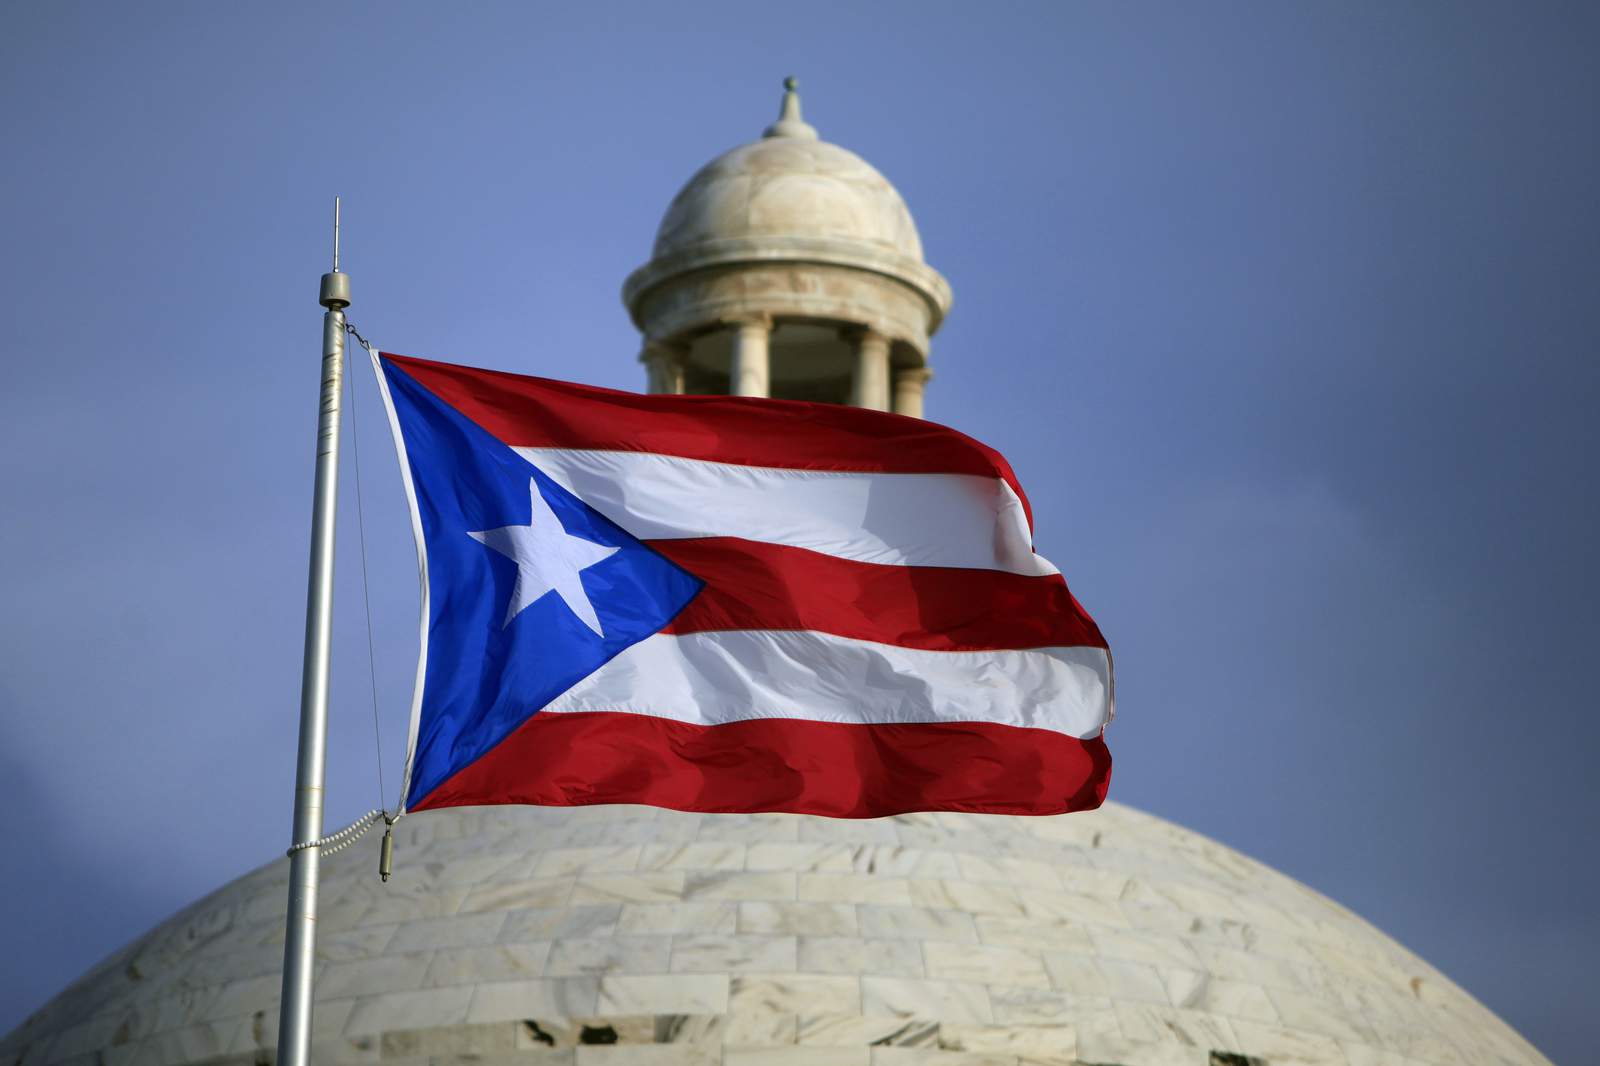 Puerto Rico power company gives T&D reins to private firms